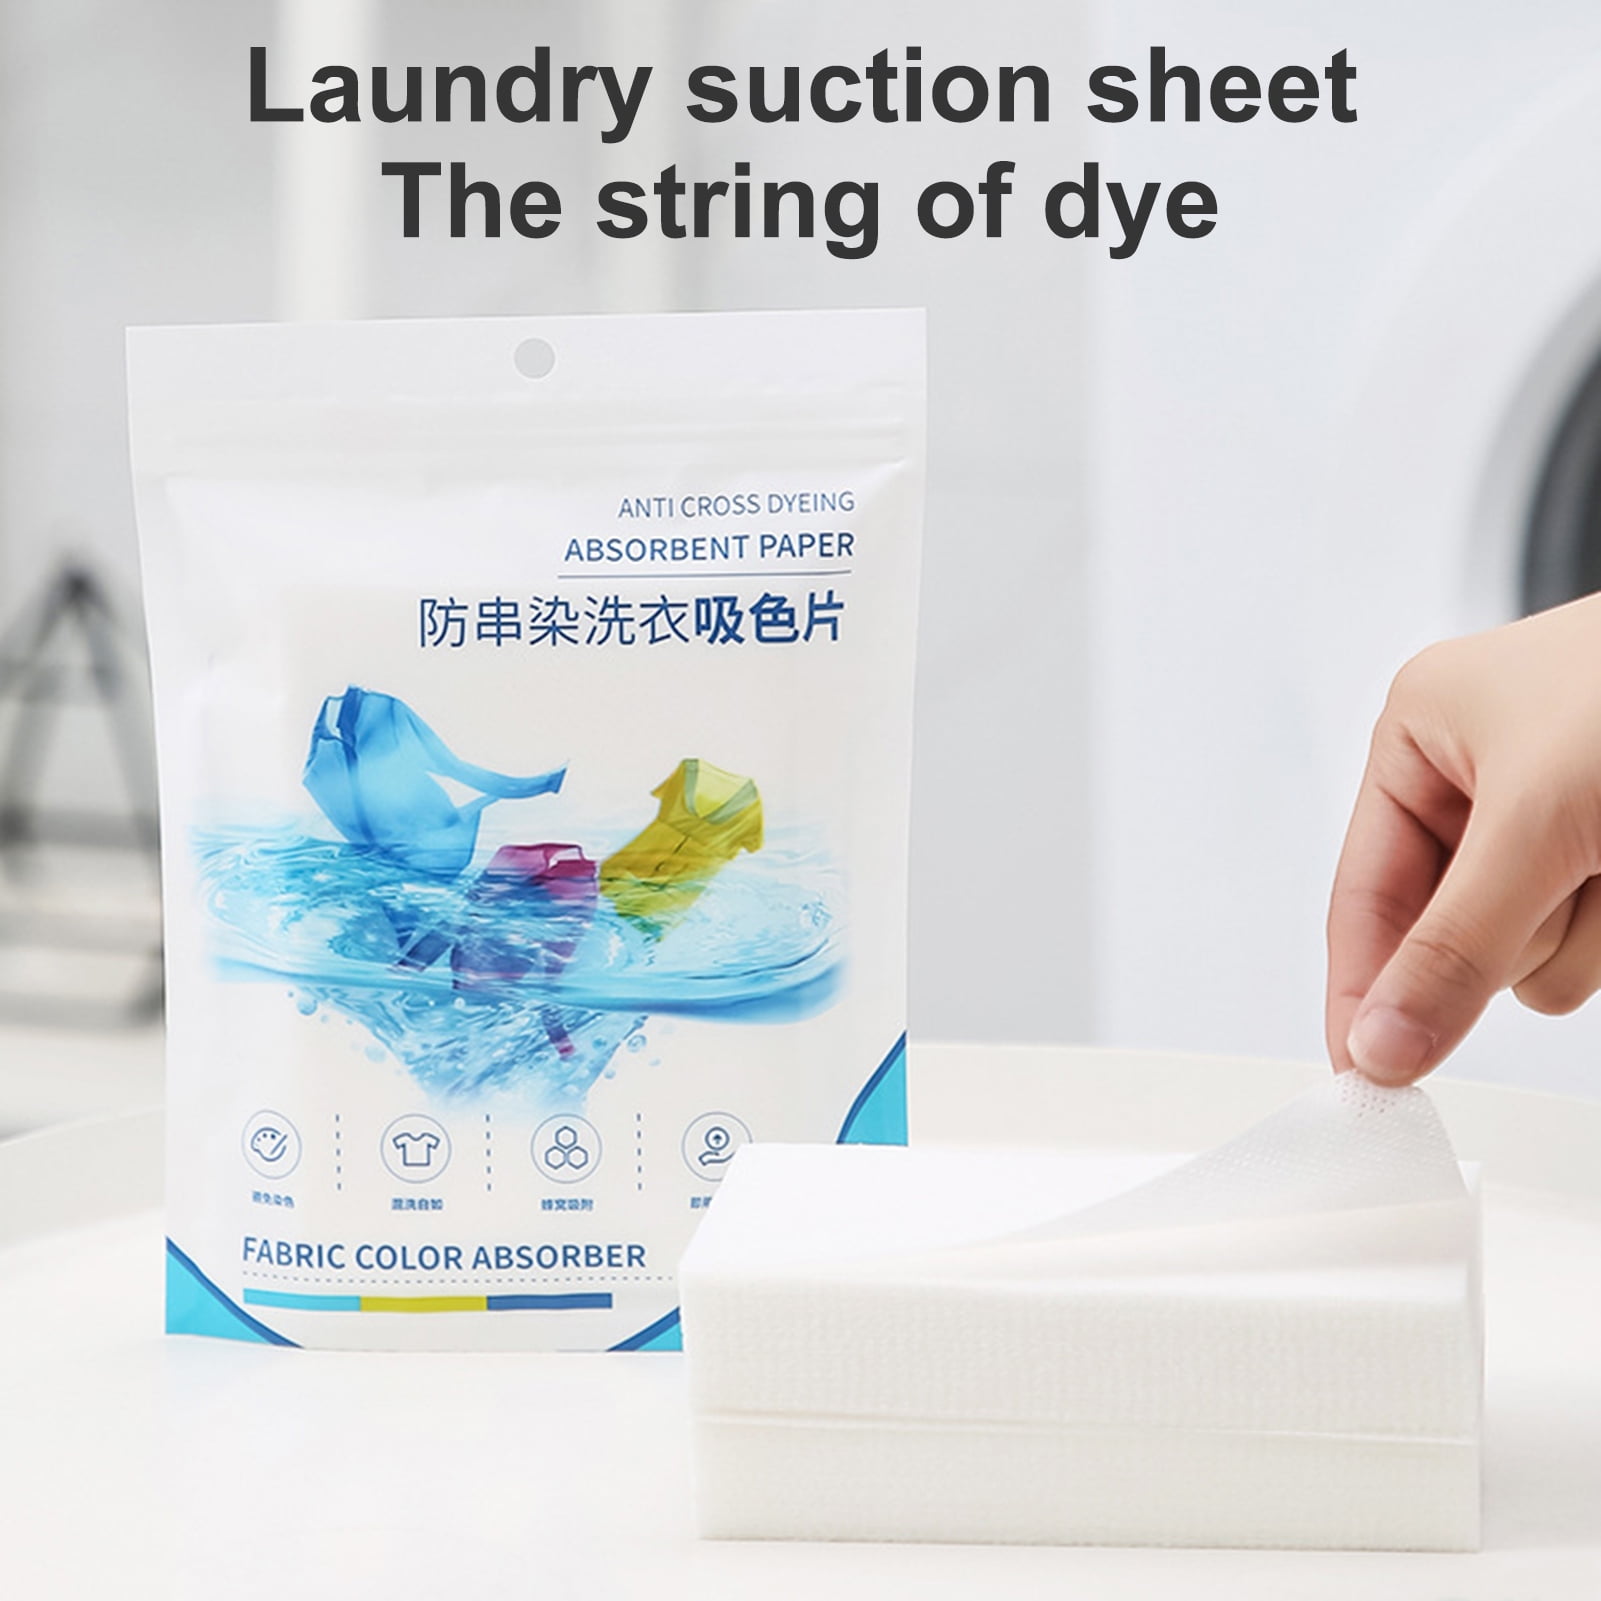 Laundry Detergent Sheets – Tortuga